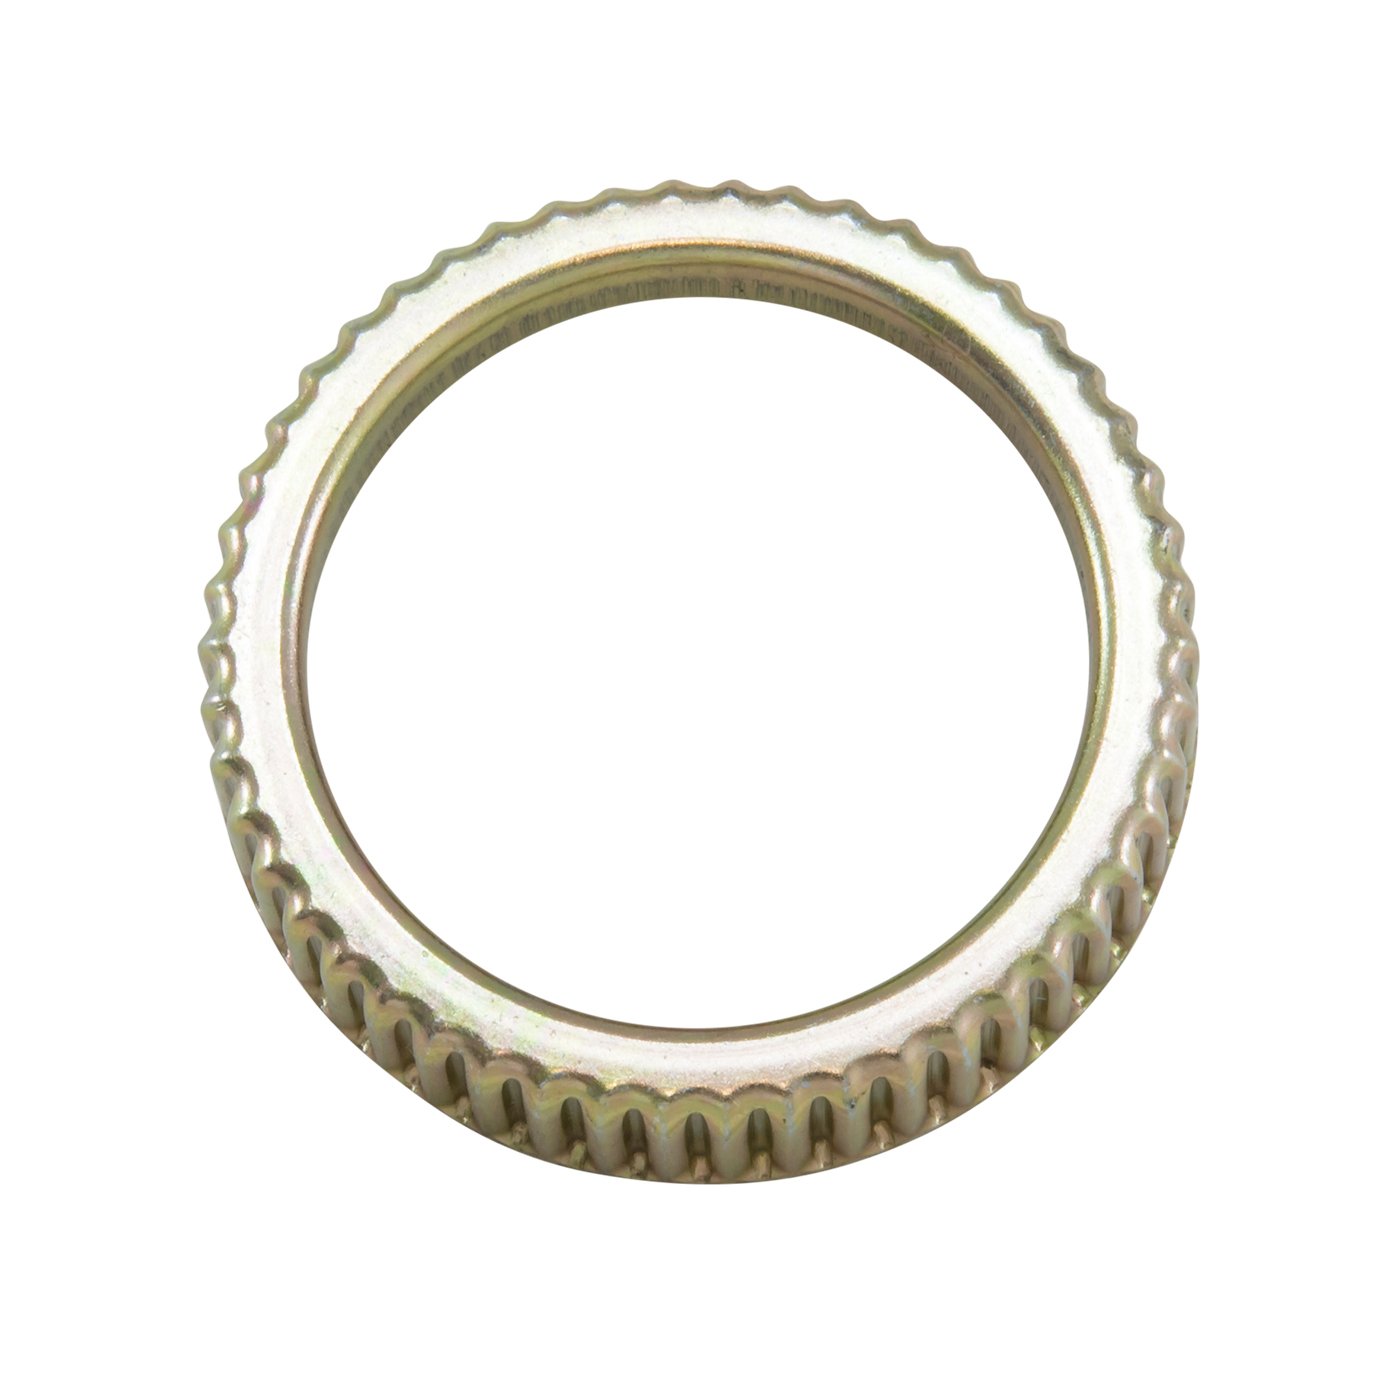 3.7 in. Abs Ring With 50 Teeth For 8.8 in. Ford '92-'98 Crown Victoria